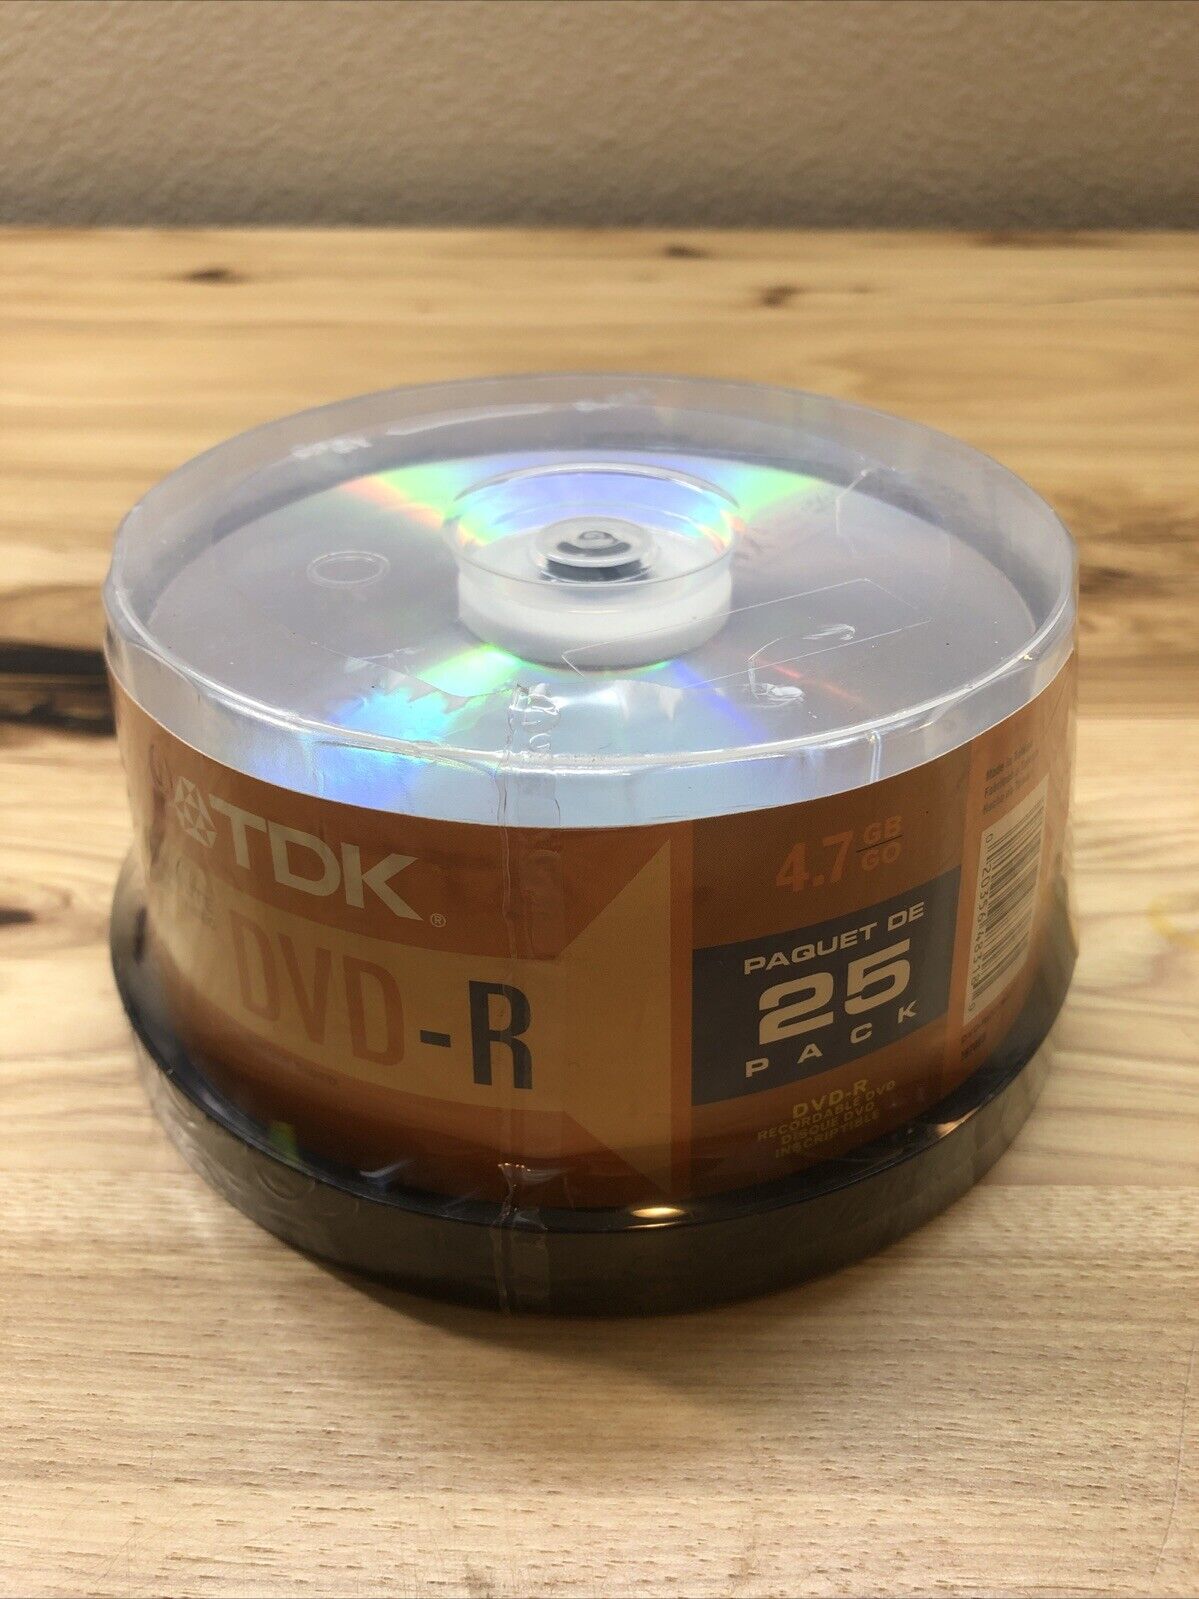 TDK 4X COMPATIBLE 4.7GB DVD-R 25-Pack Spindle 120 MINUTE VIDEO BLANK DVD’s